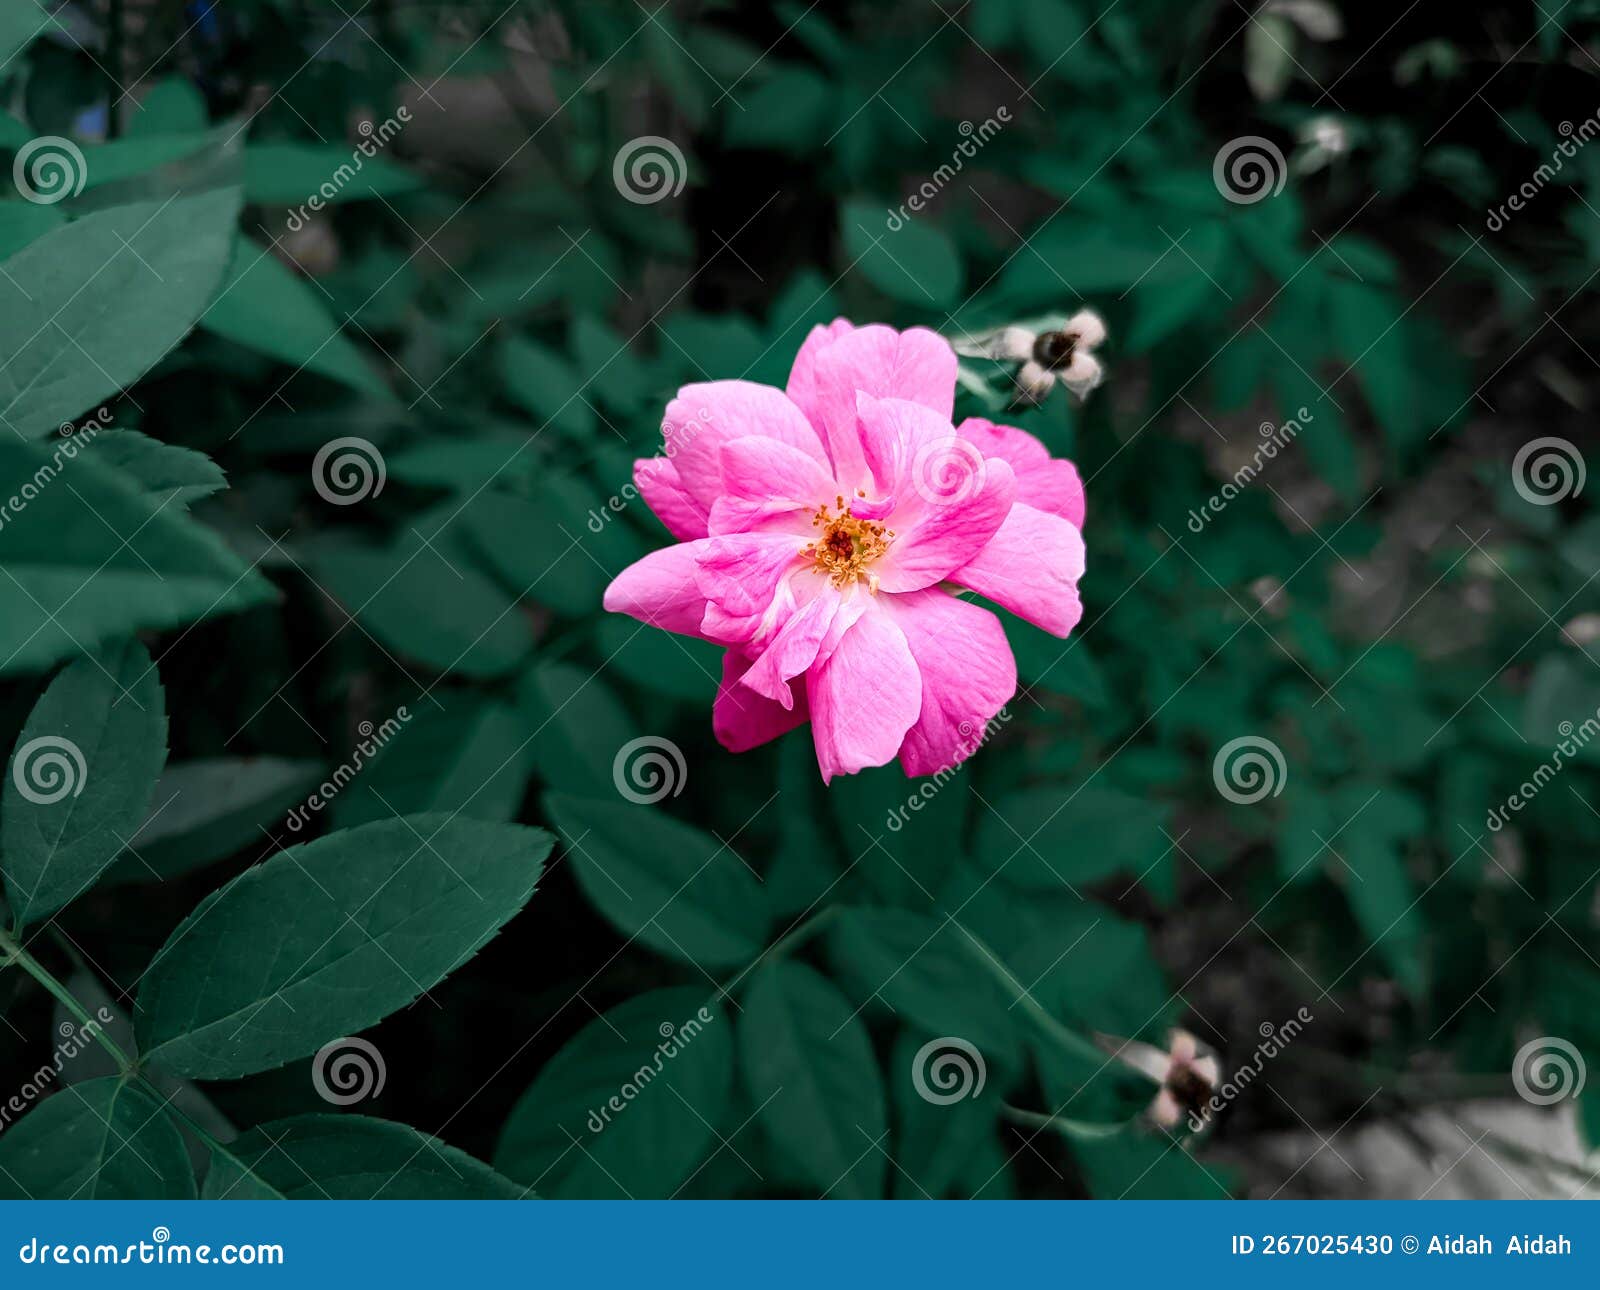 aesthetic portrait of a rosa flower with vivid pink color